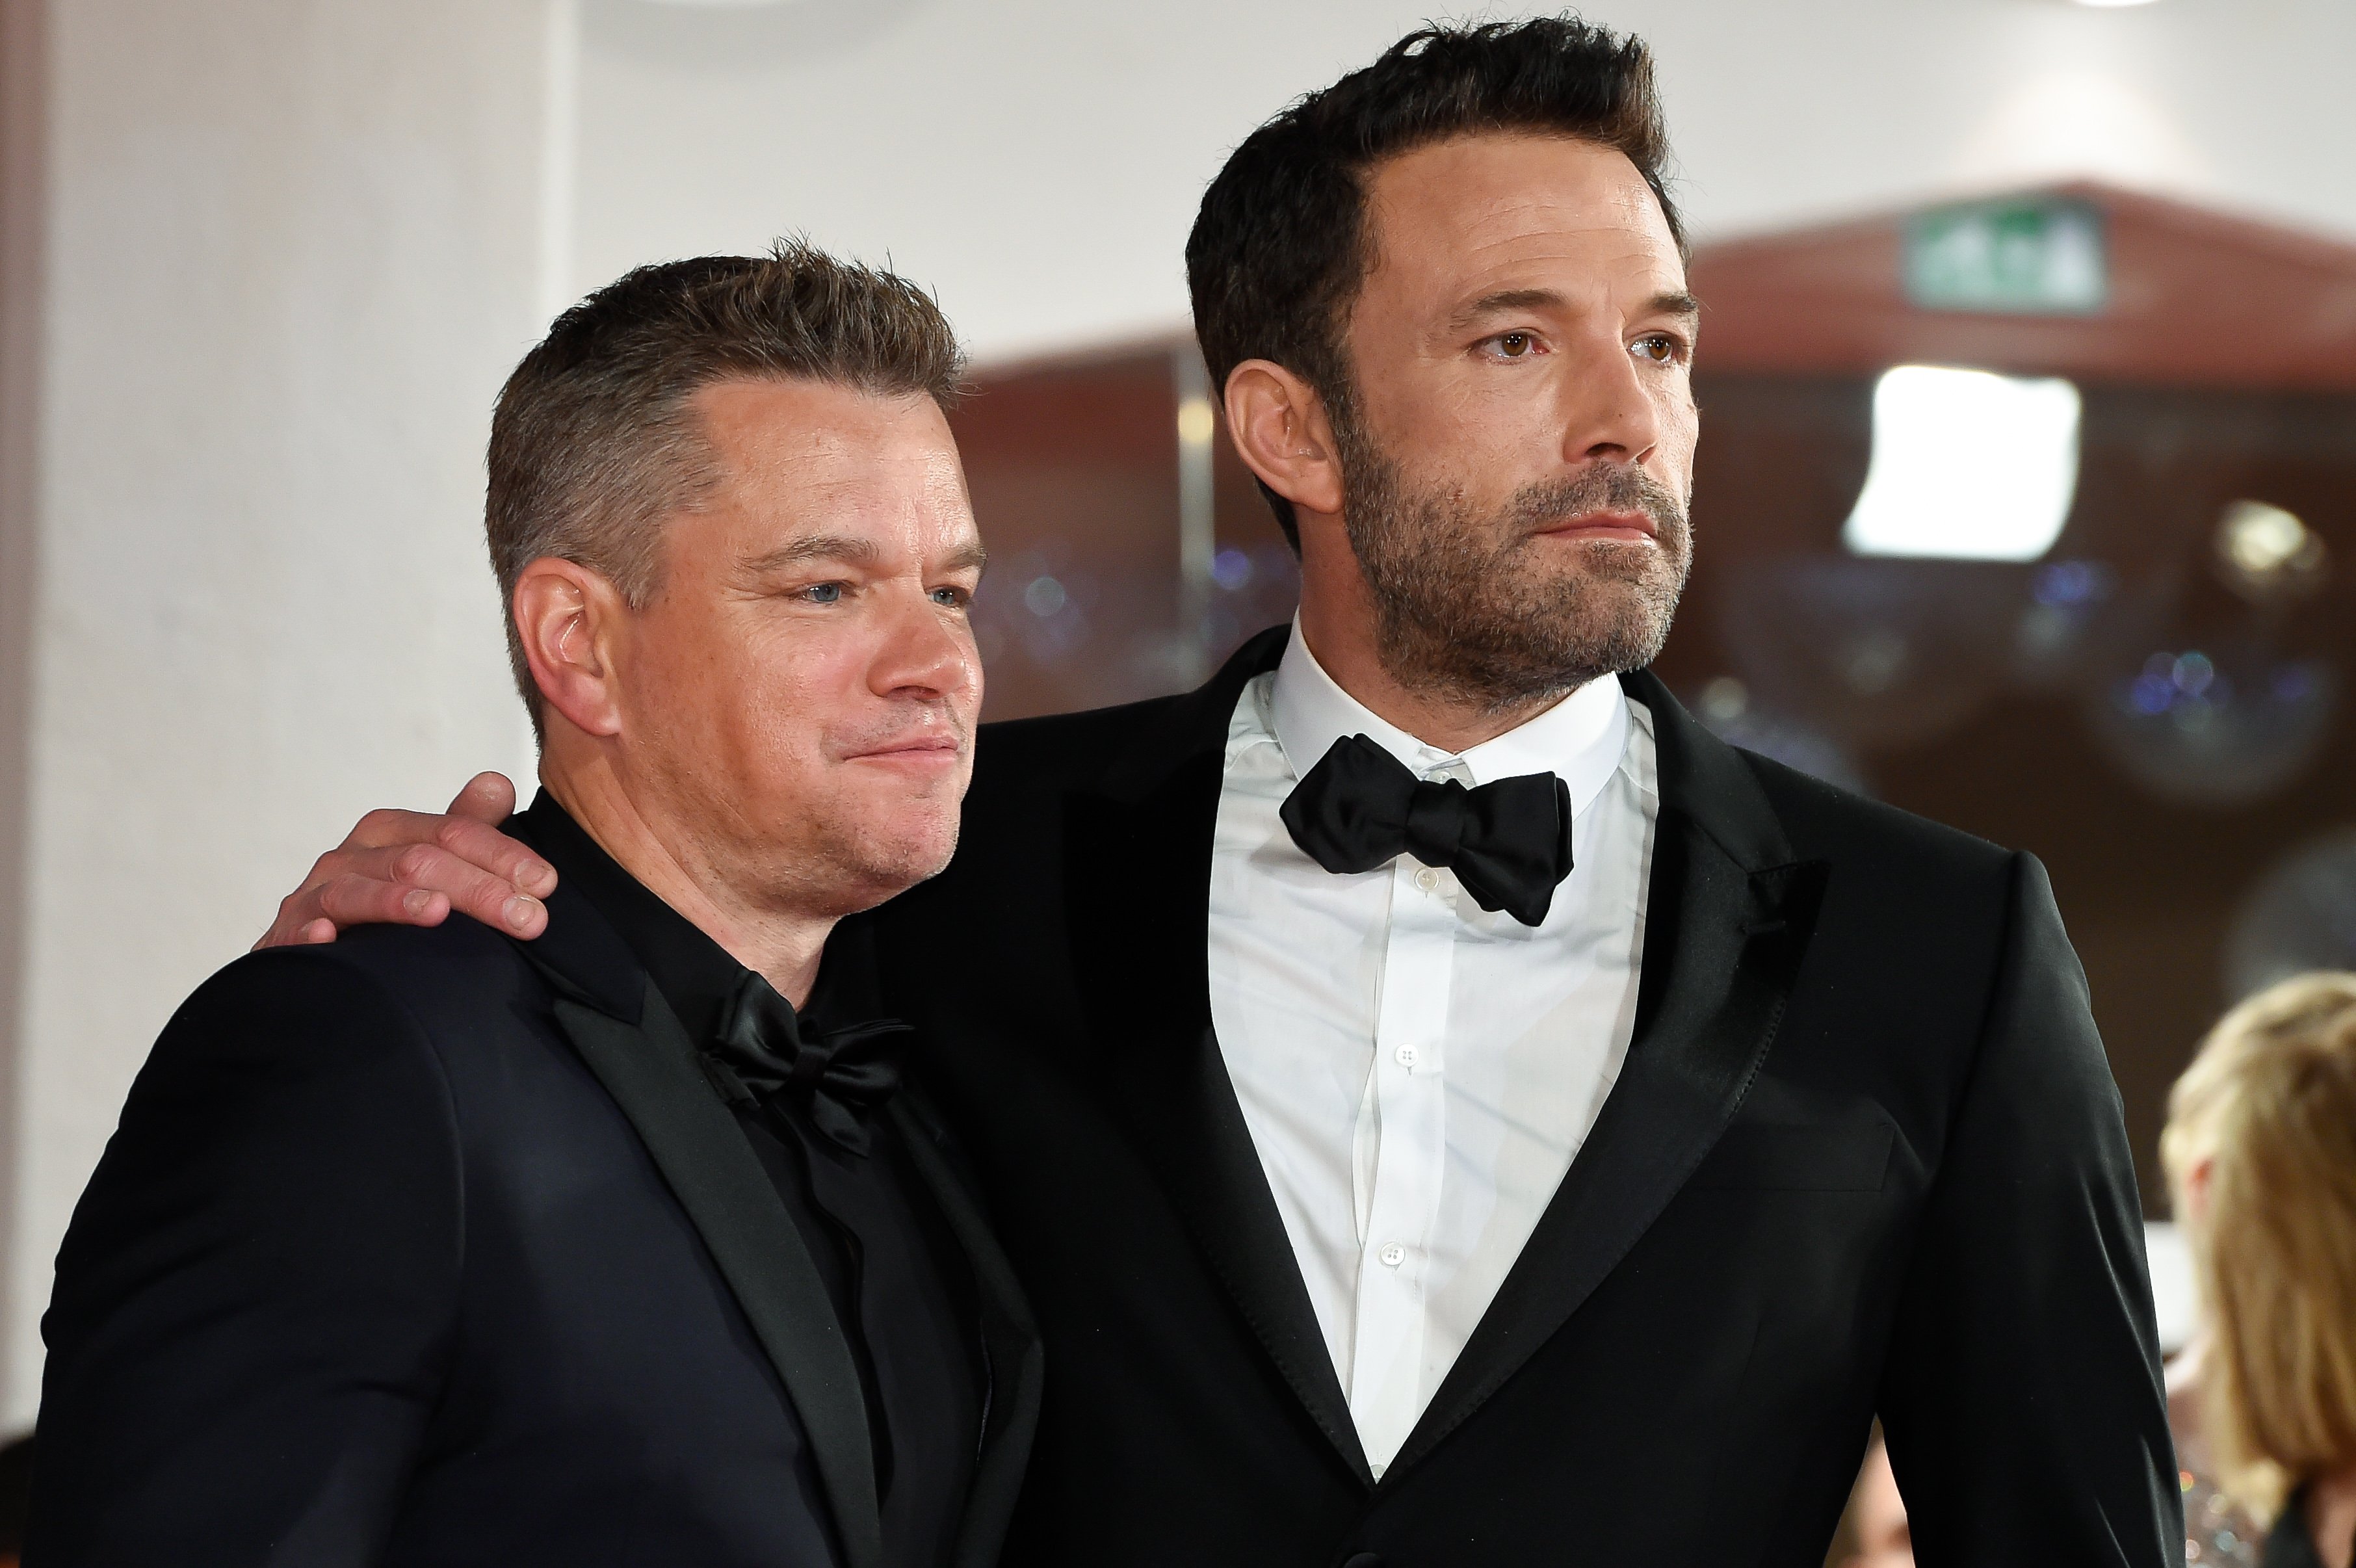 Matt Damon, in a black suit and black shirt, and Ben Affleck, in a black tuxedo, at the premiere of their film 'The Last Duel' at the Venice Film Festival in 2021.